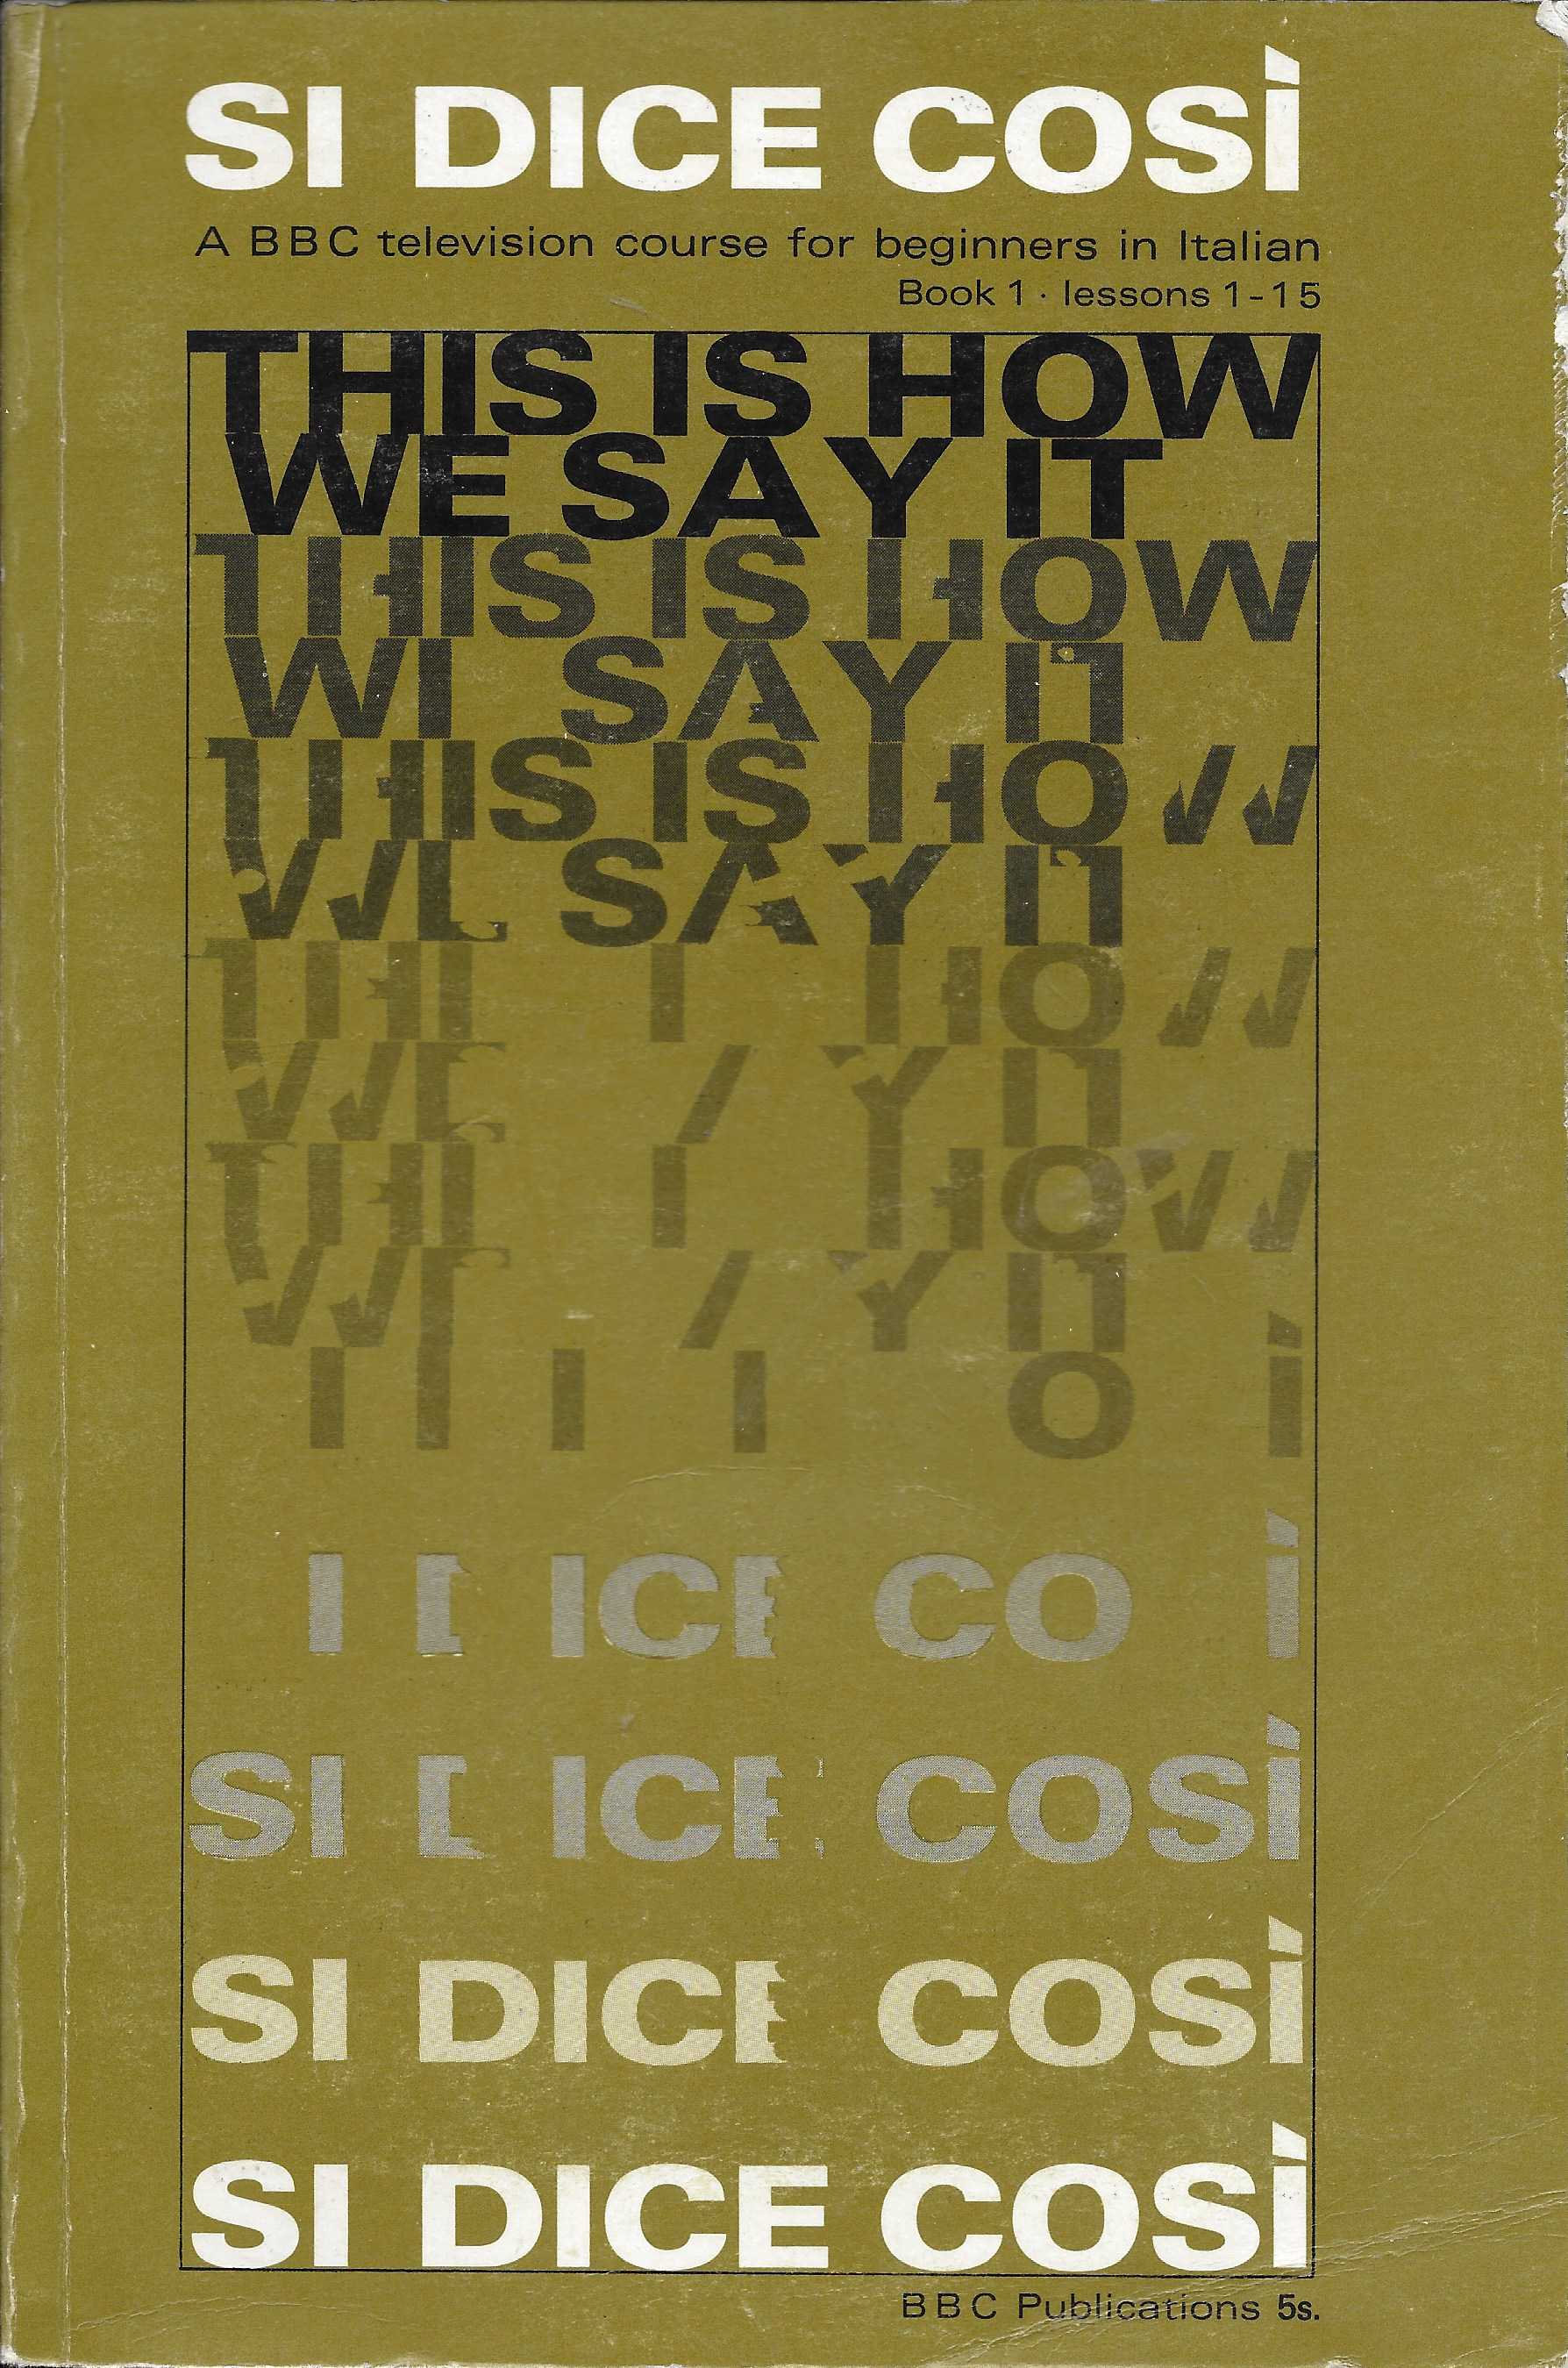 Picture of SBN 563 08368 9 Si dice cosi - Book 1 by artist Joseph Cremona from the BBC books - Records and Tapes library